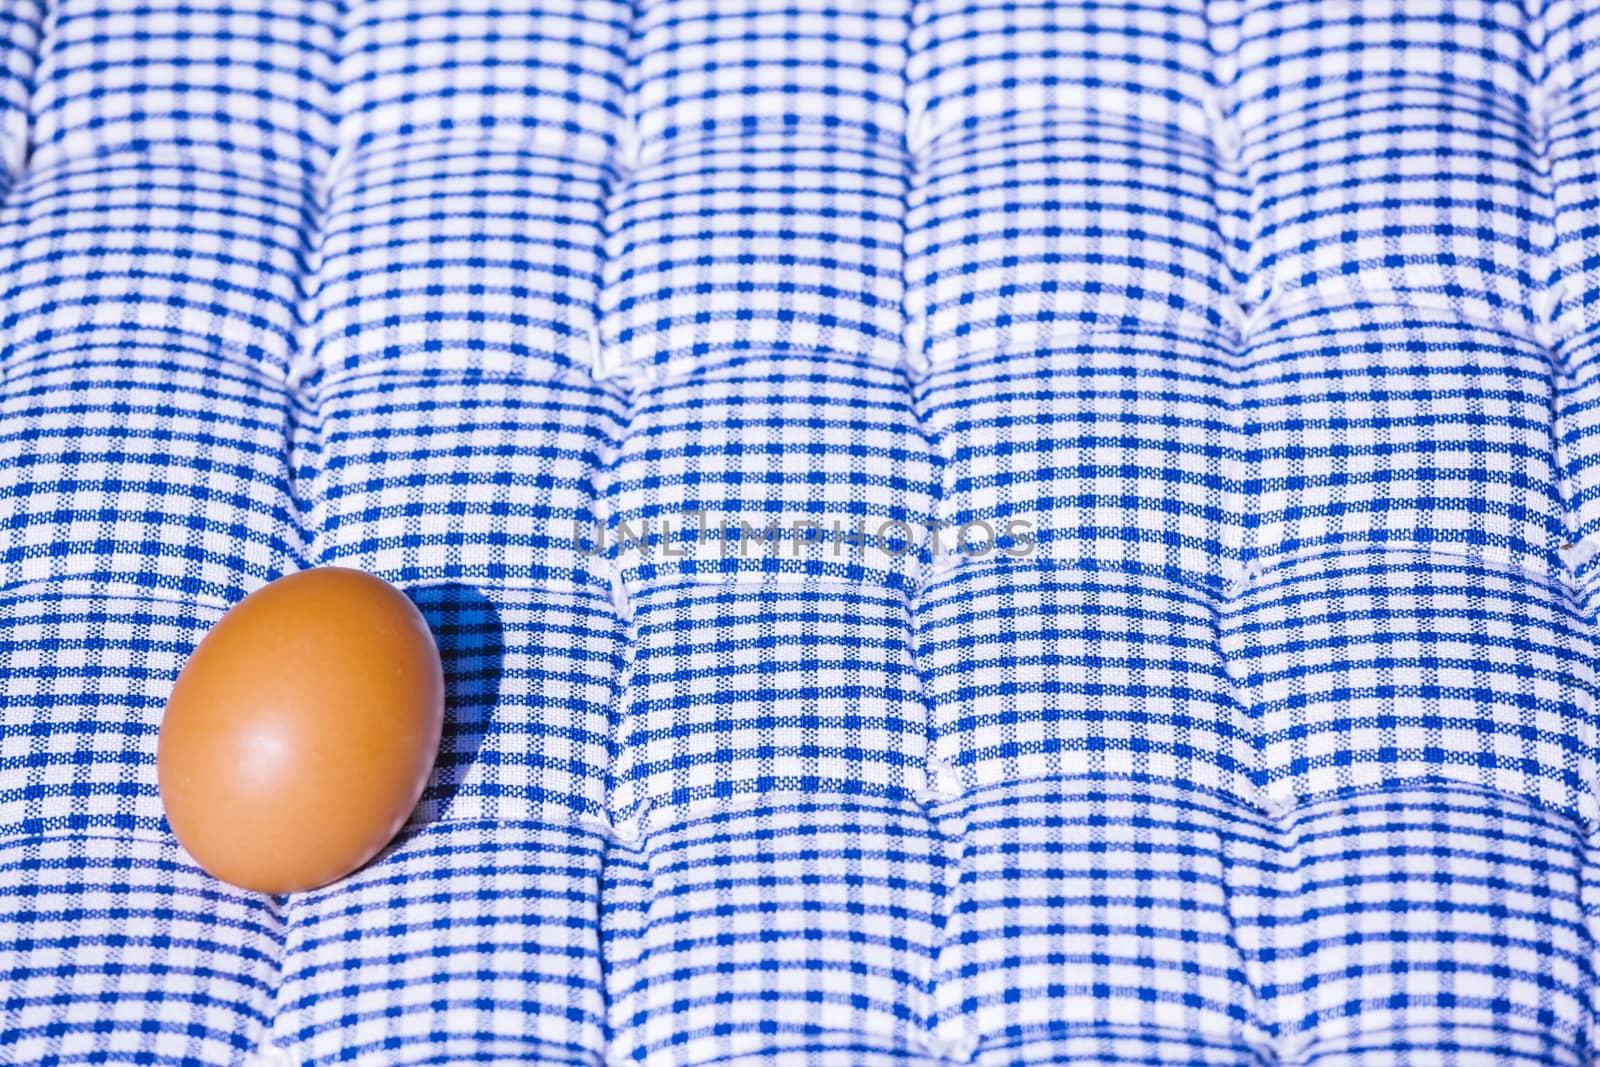 Egg on a blue and white pillow under the sun in summertime